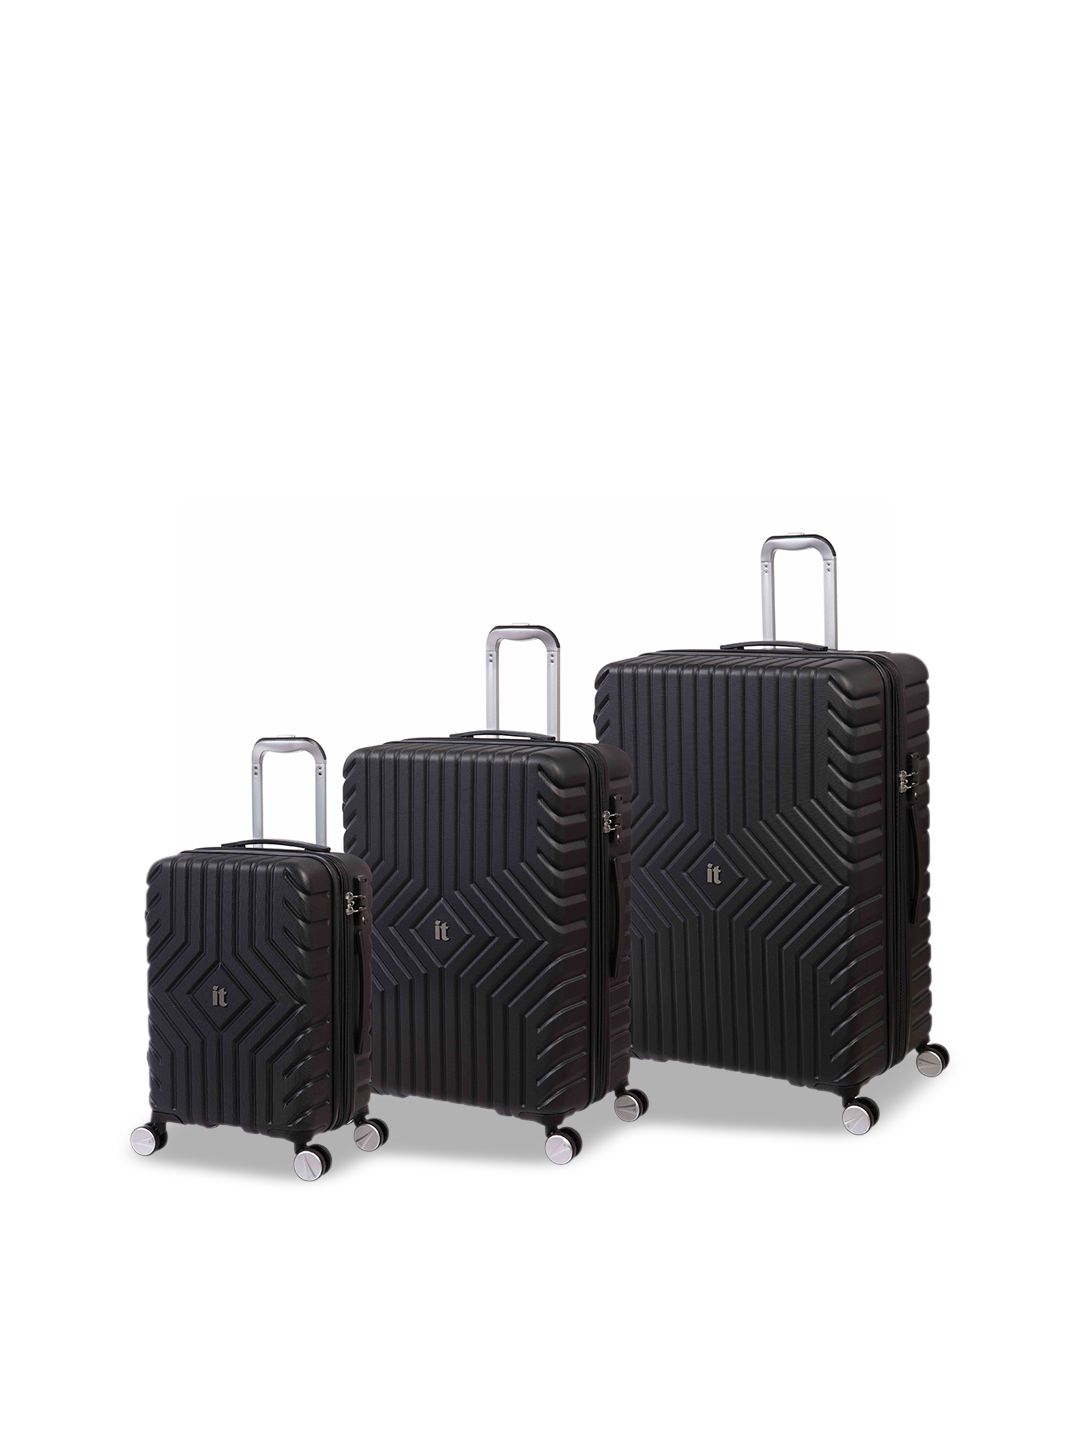 IT luggage Set Of 3 Black Solid Hard-Sided Trolley Suitcases Price in India